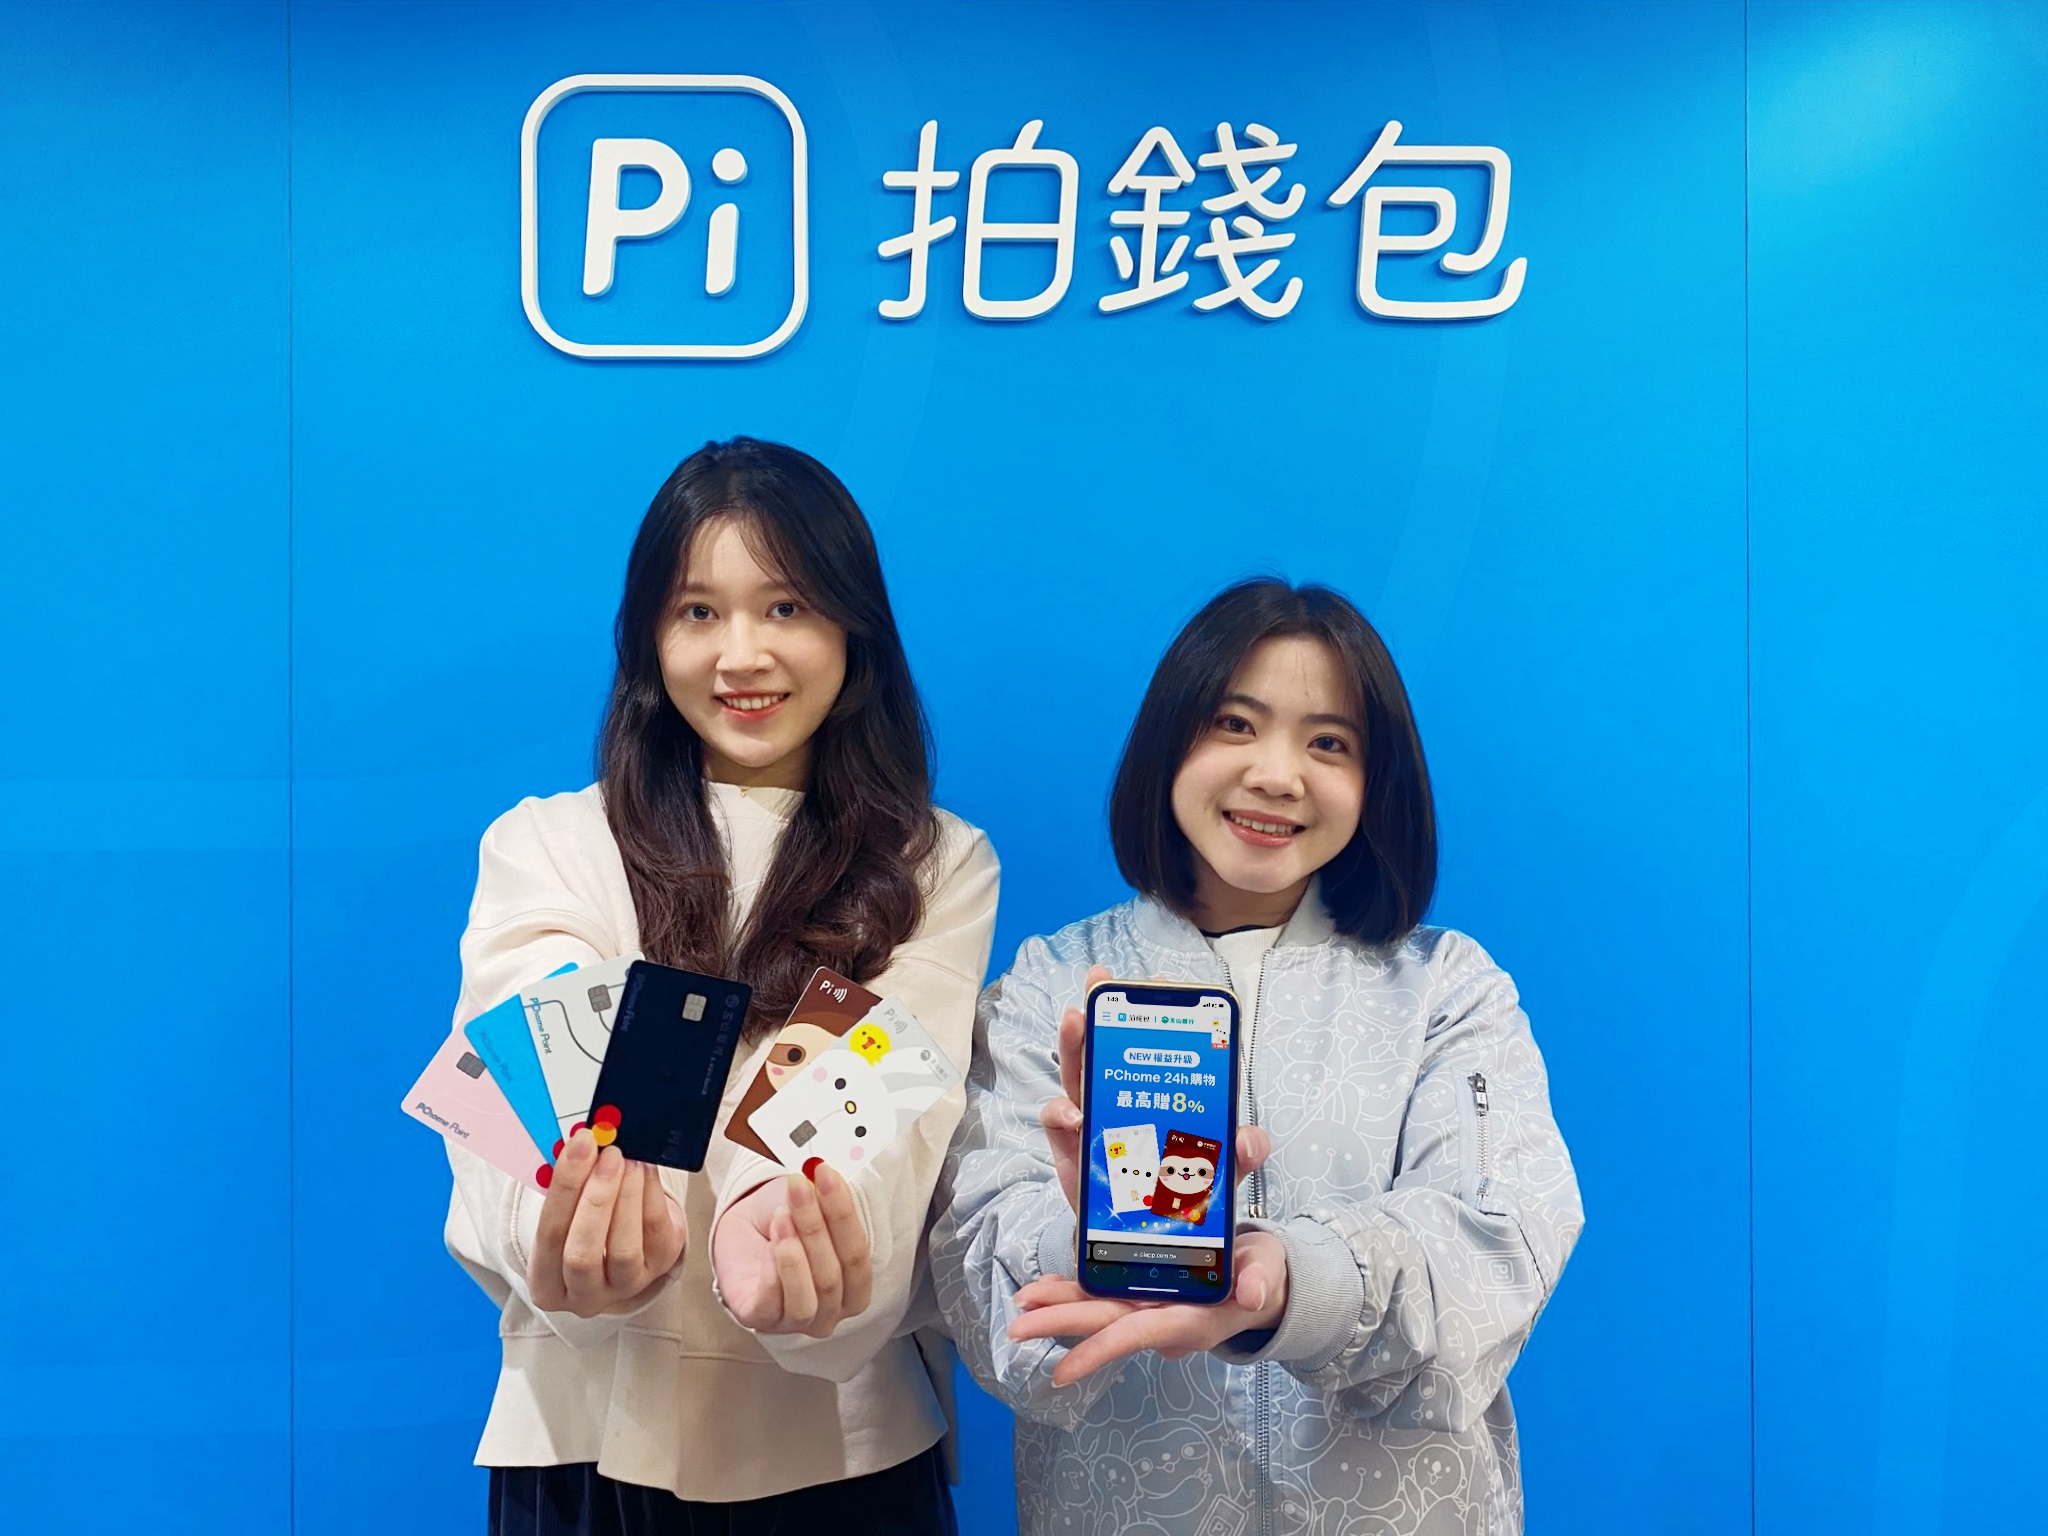 The Pi Wallet credit card of E.SUN Bank」Benefits Upgrade Up to 8% PPoint Rebate with PChome 24h Shopping  Up to 6% PPoint Rebate for Overseas Purchase